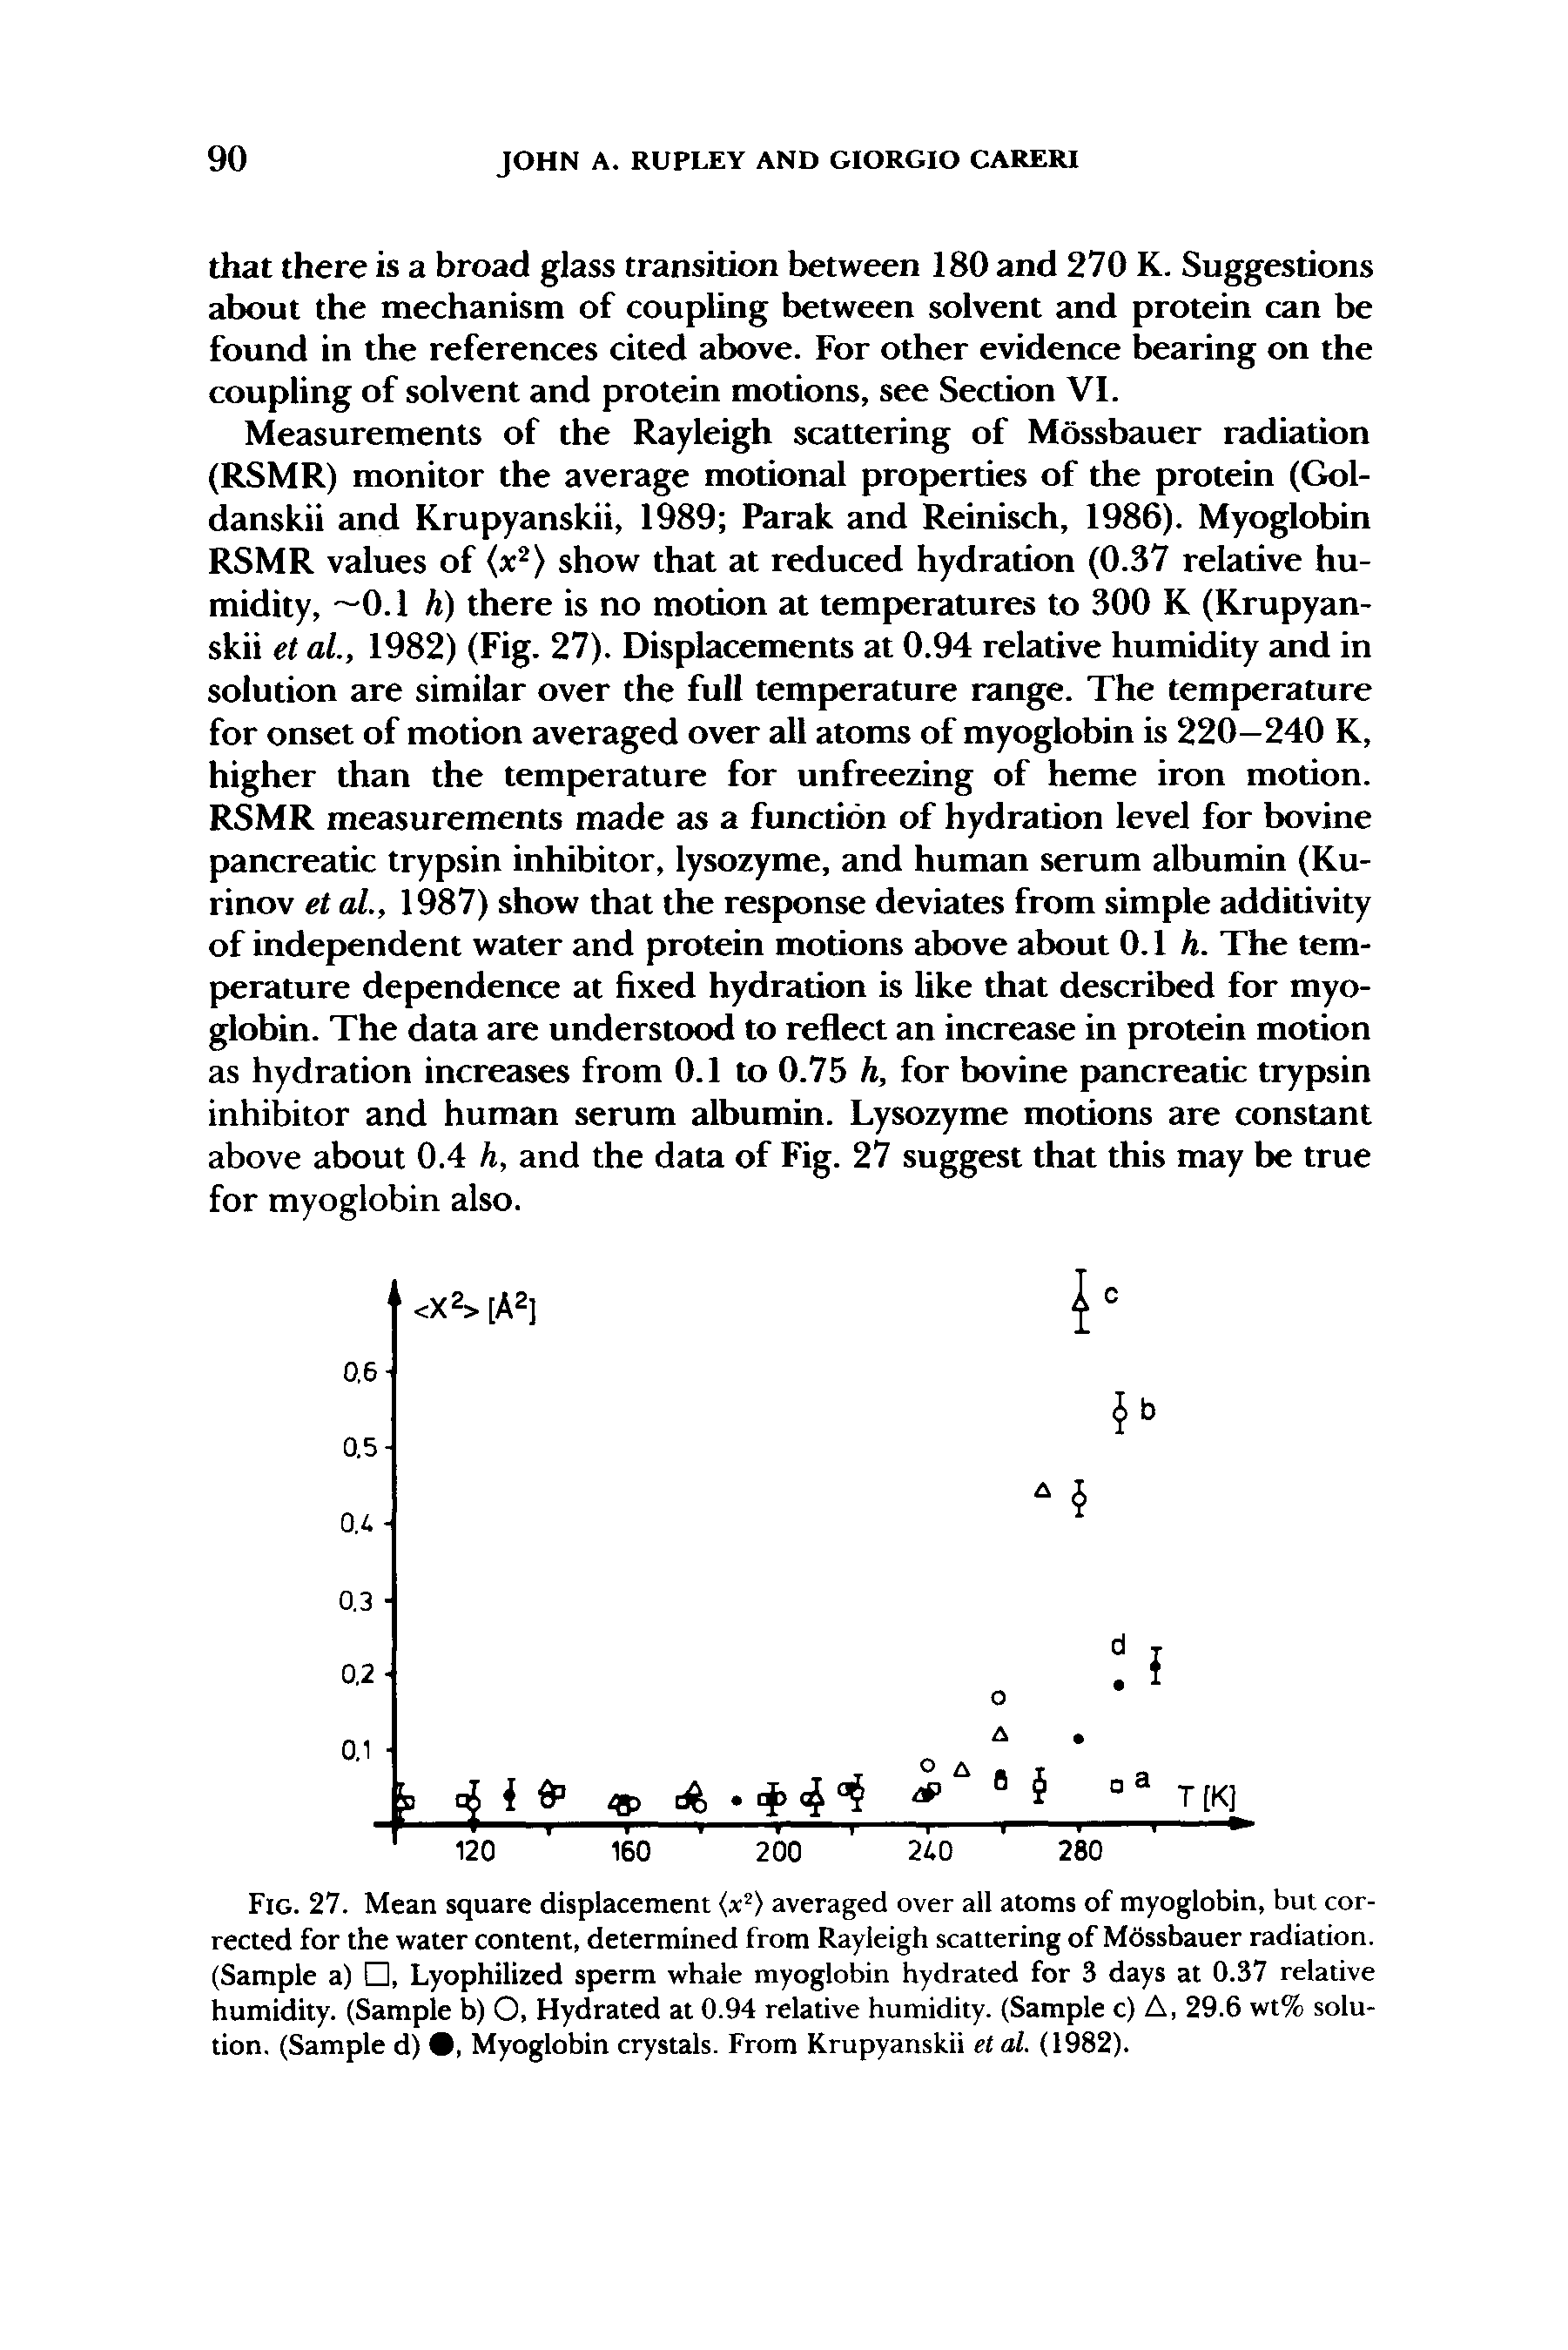 Fig. 27. Mean square displacement averaged over all atoms of myoglobin, but corrected for the water content, determined from Rayleigh scattering of Mossbauer radiation. (Sample a) , Lyophilized sperm whale myoglobin hydrated for 3 days at 0.37 relative humidity. (Sample b) O, Hydrated at 0.94 relative humidity. (Sample c) A, 29.6 wt% solution. (Sample d) 9, Myoglobin crystals. From Krupyanskii etal. (1982).